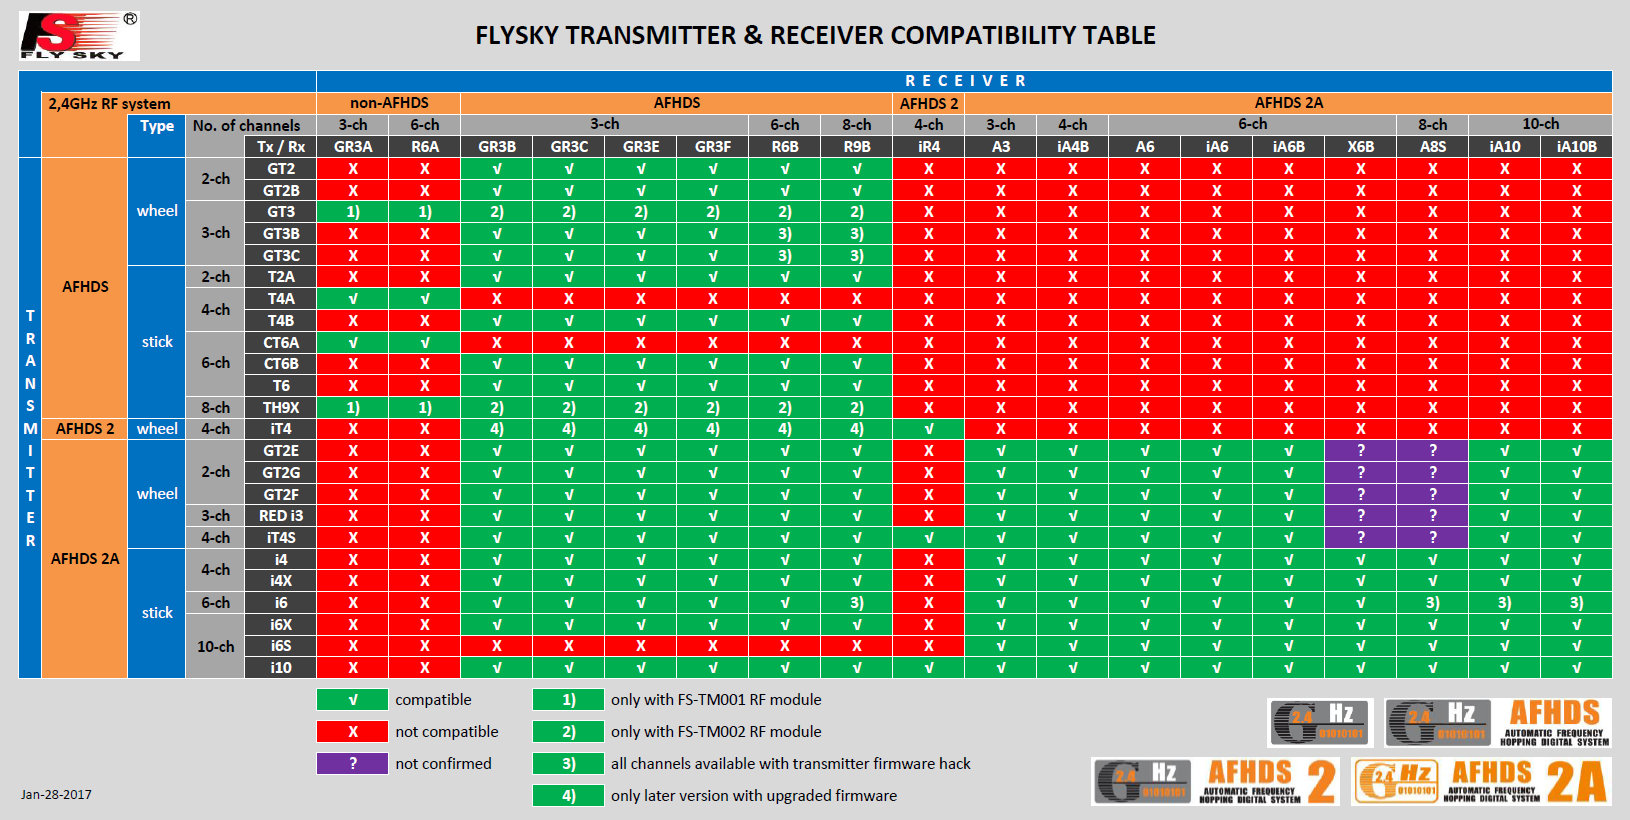 FlySky transmitter & receiver compatibility table